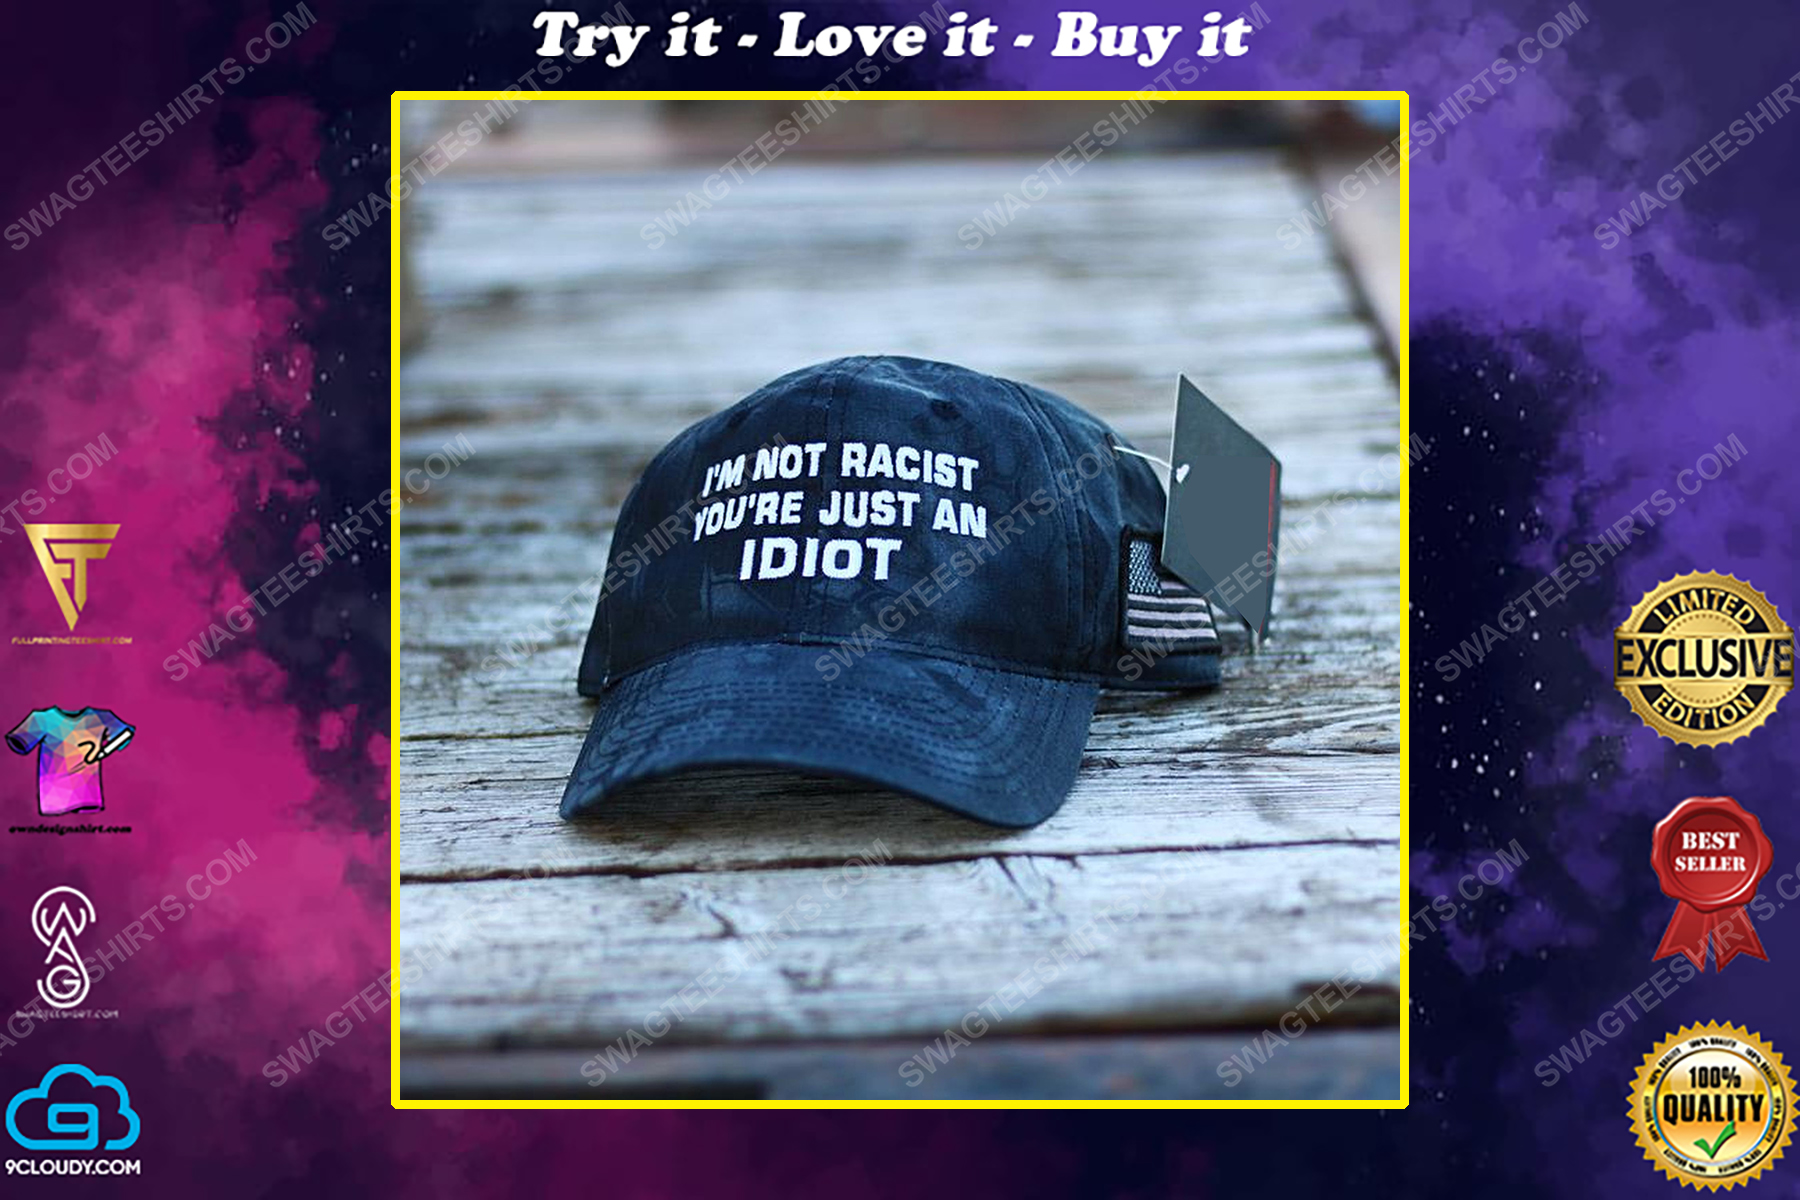 I'm not racist you're just an idiot full print classic hat